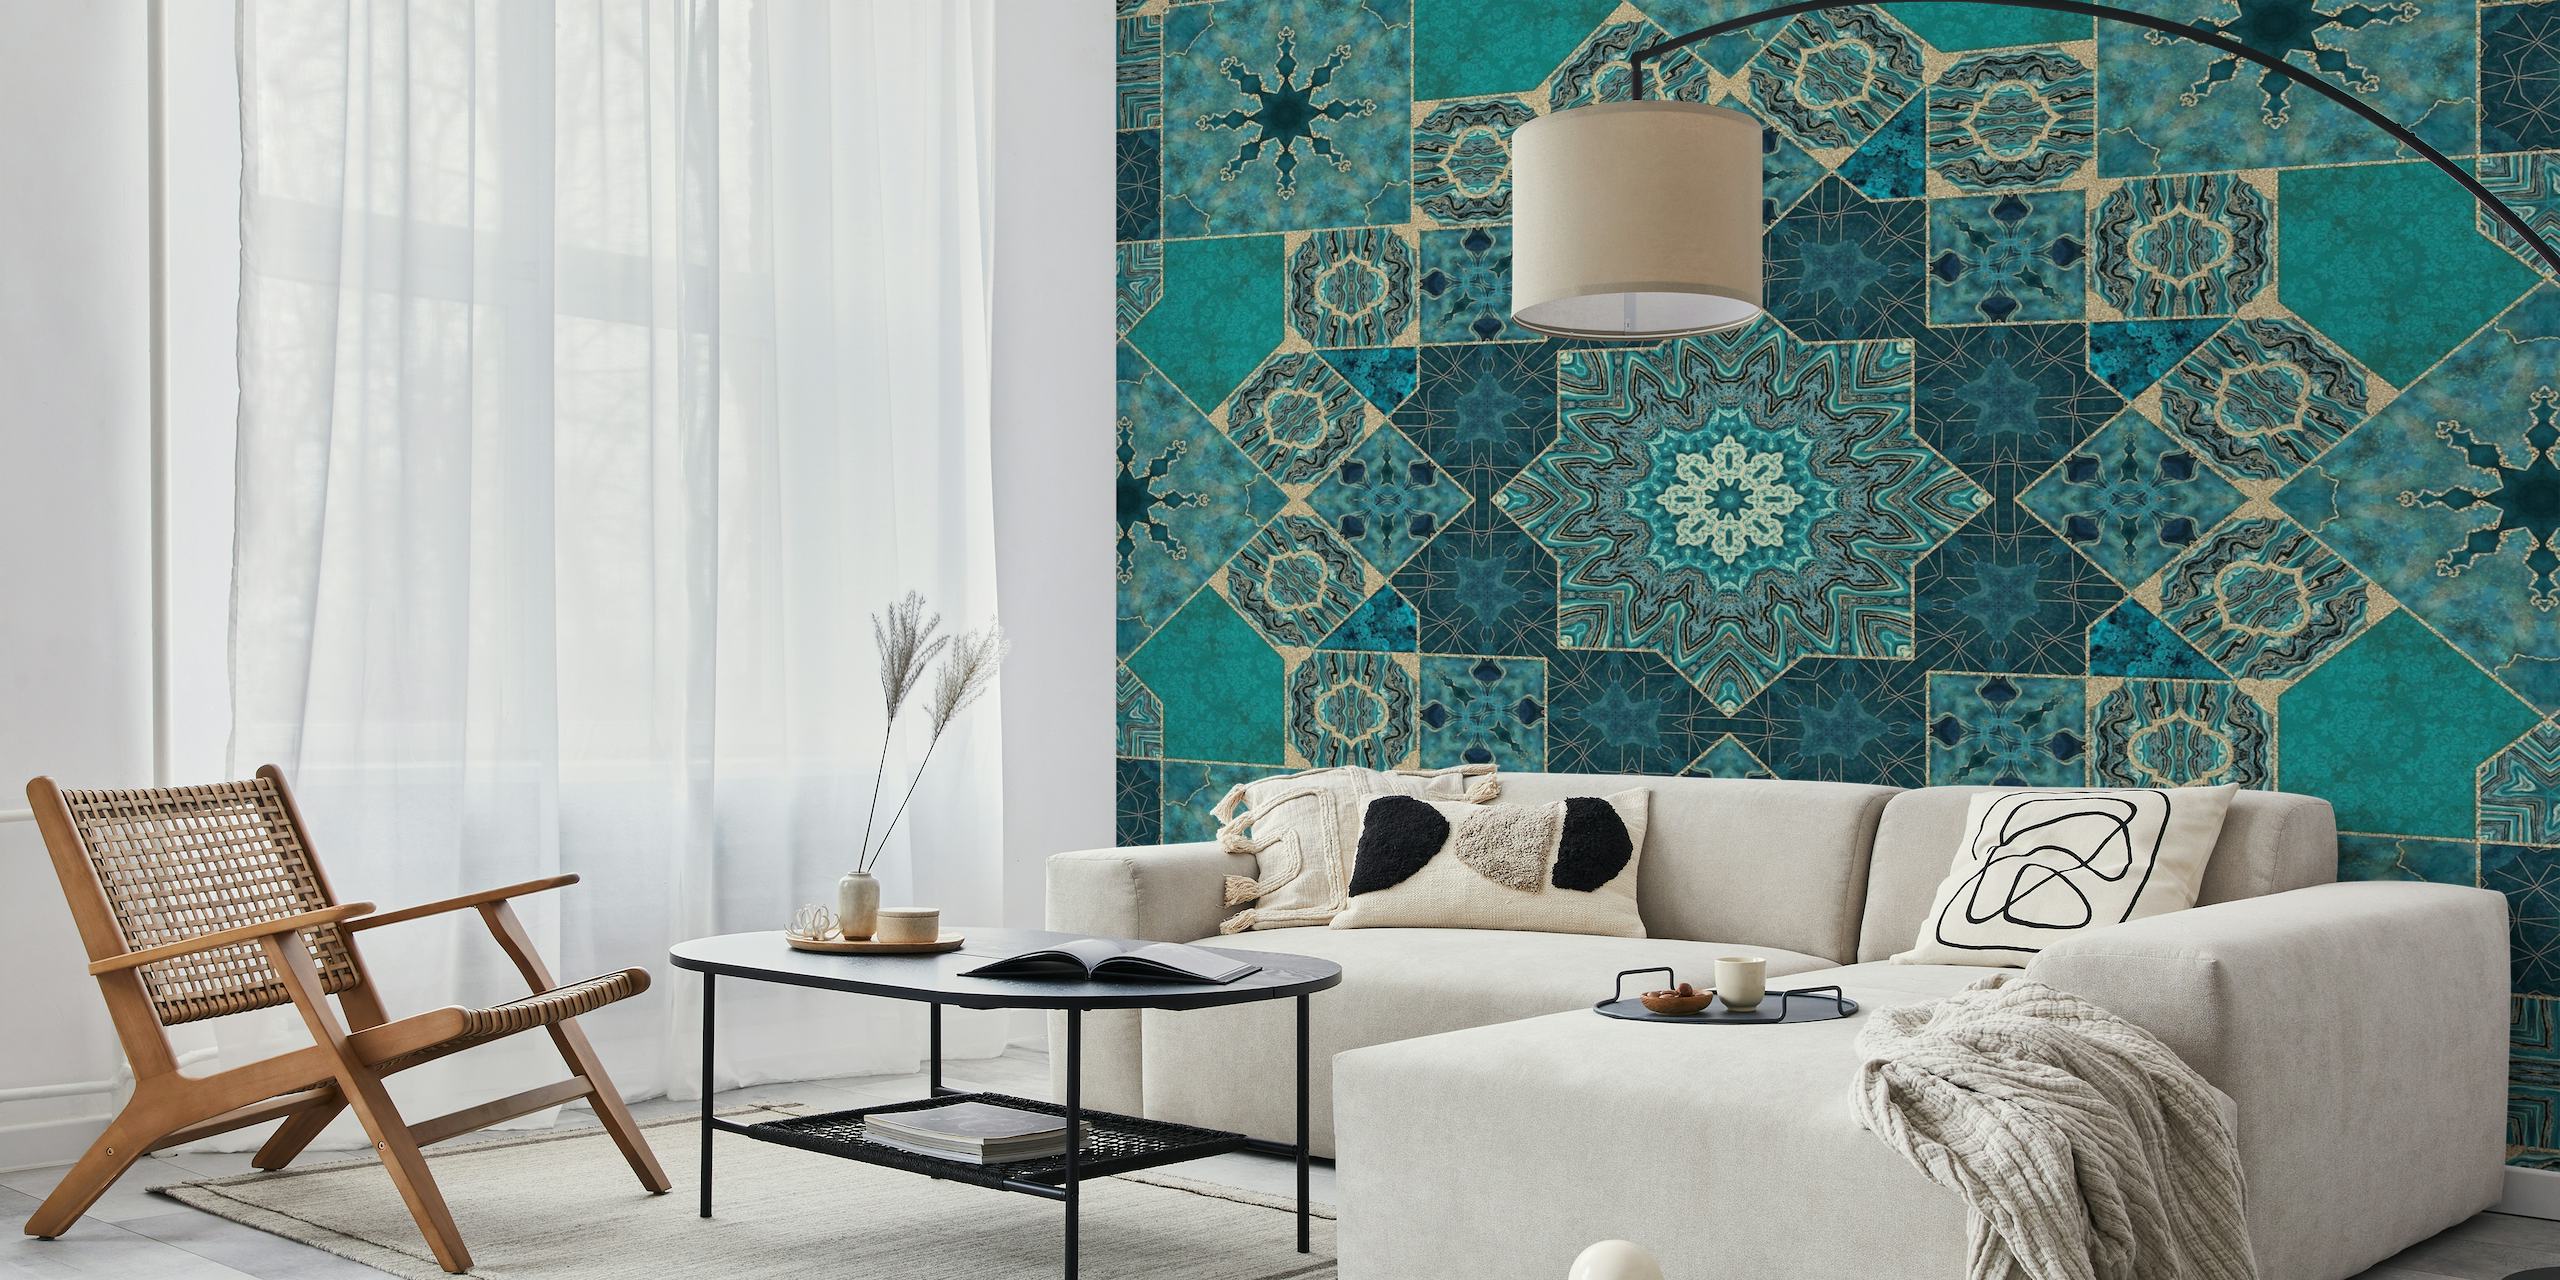 Artisanal Tiles Teal Gold wall mural with geometric pattern